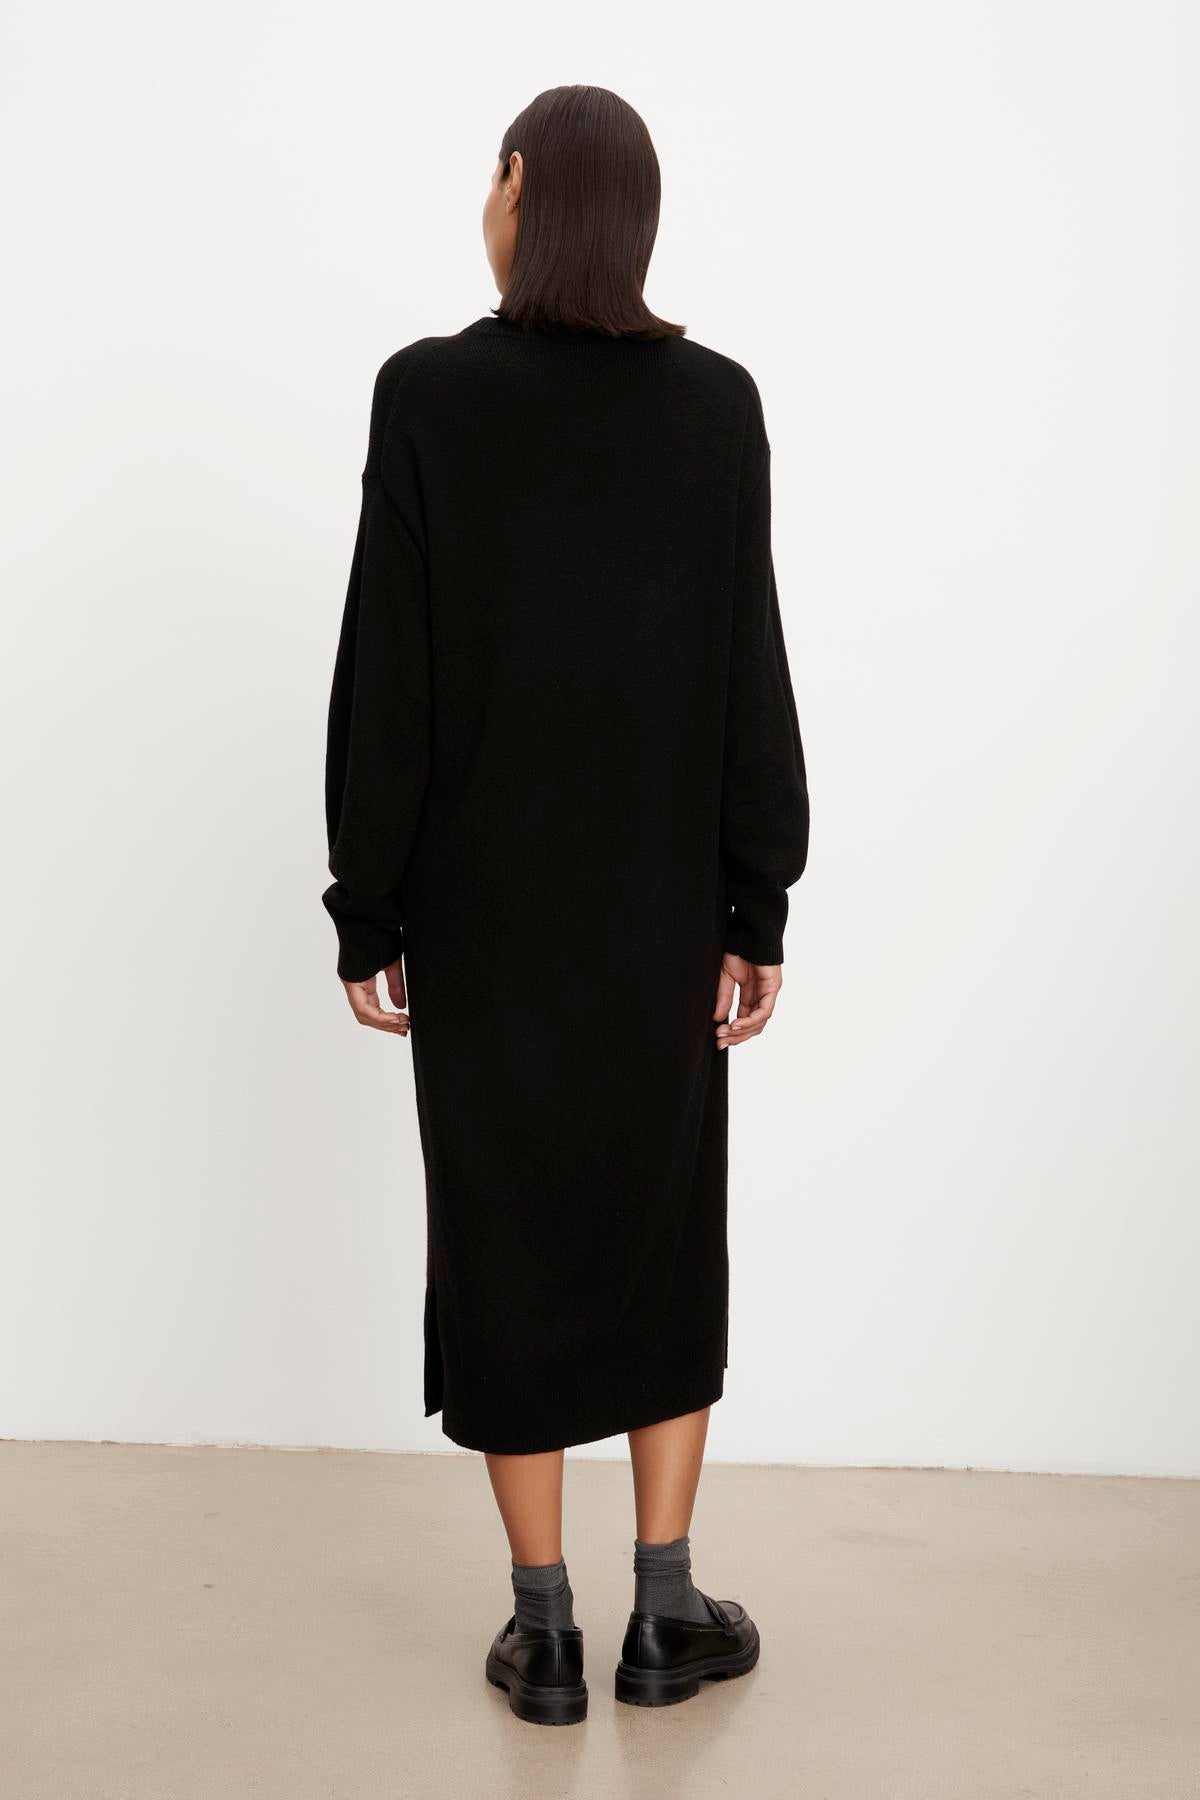 A woman from behind, wearing a KADEN SWEATER DRESS by Velvet by Graham & Spencer with a side split hem and black boots, standing against a plain white background.-35654462570689